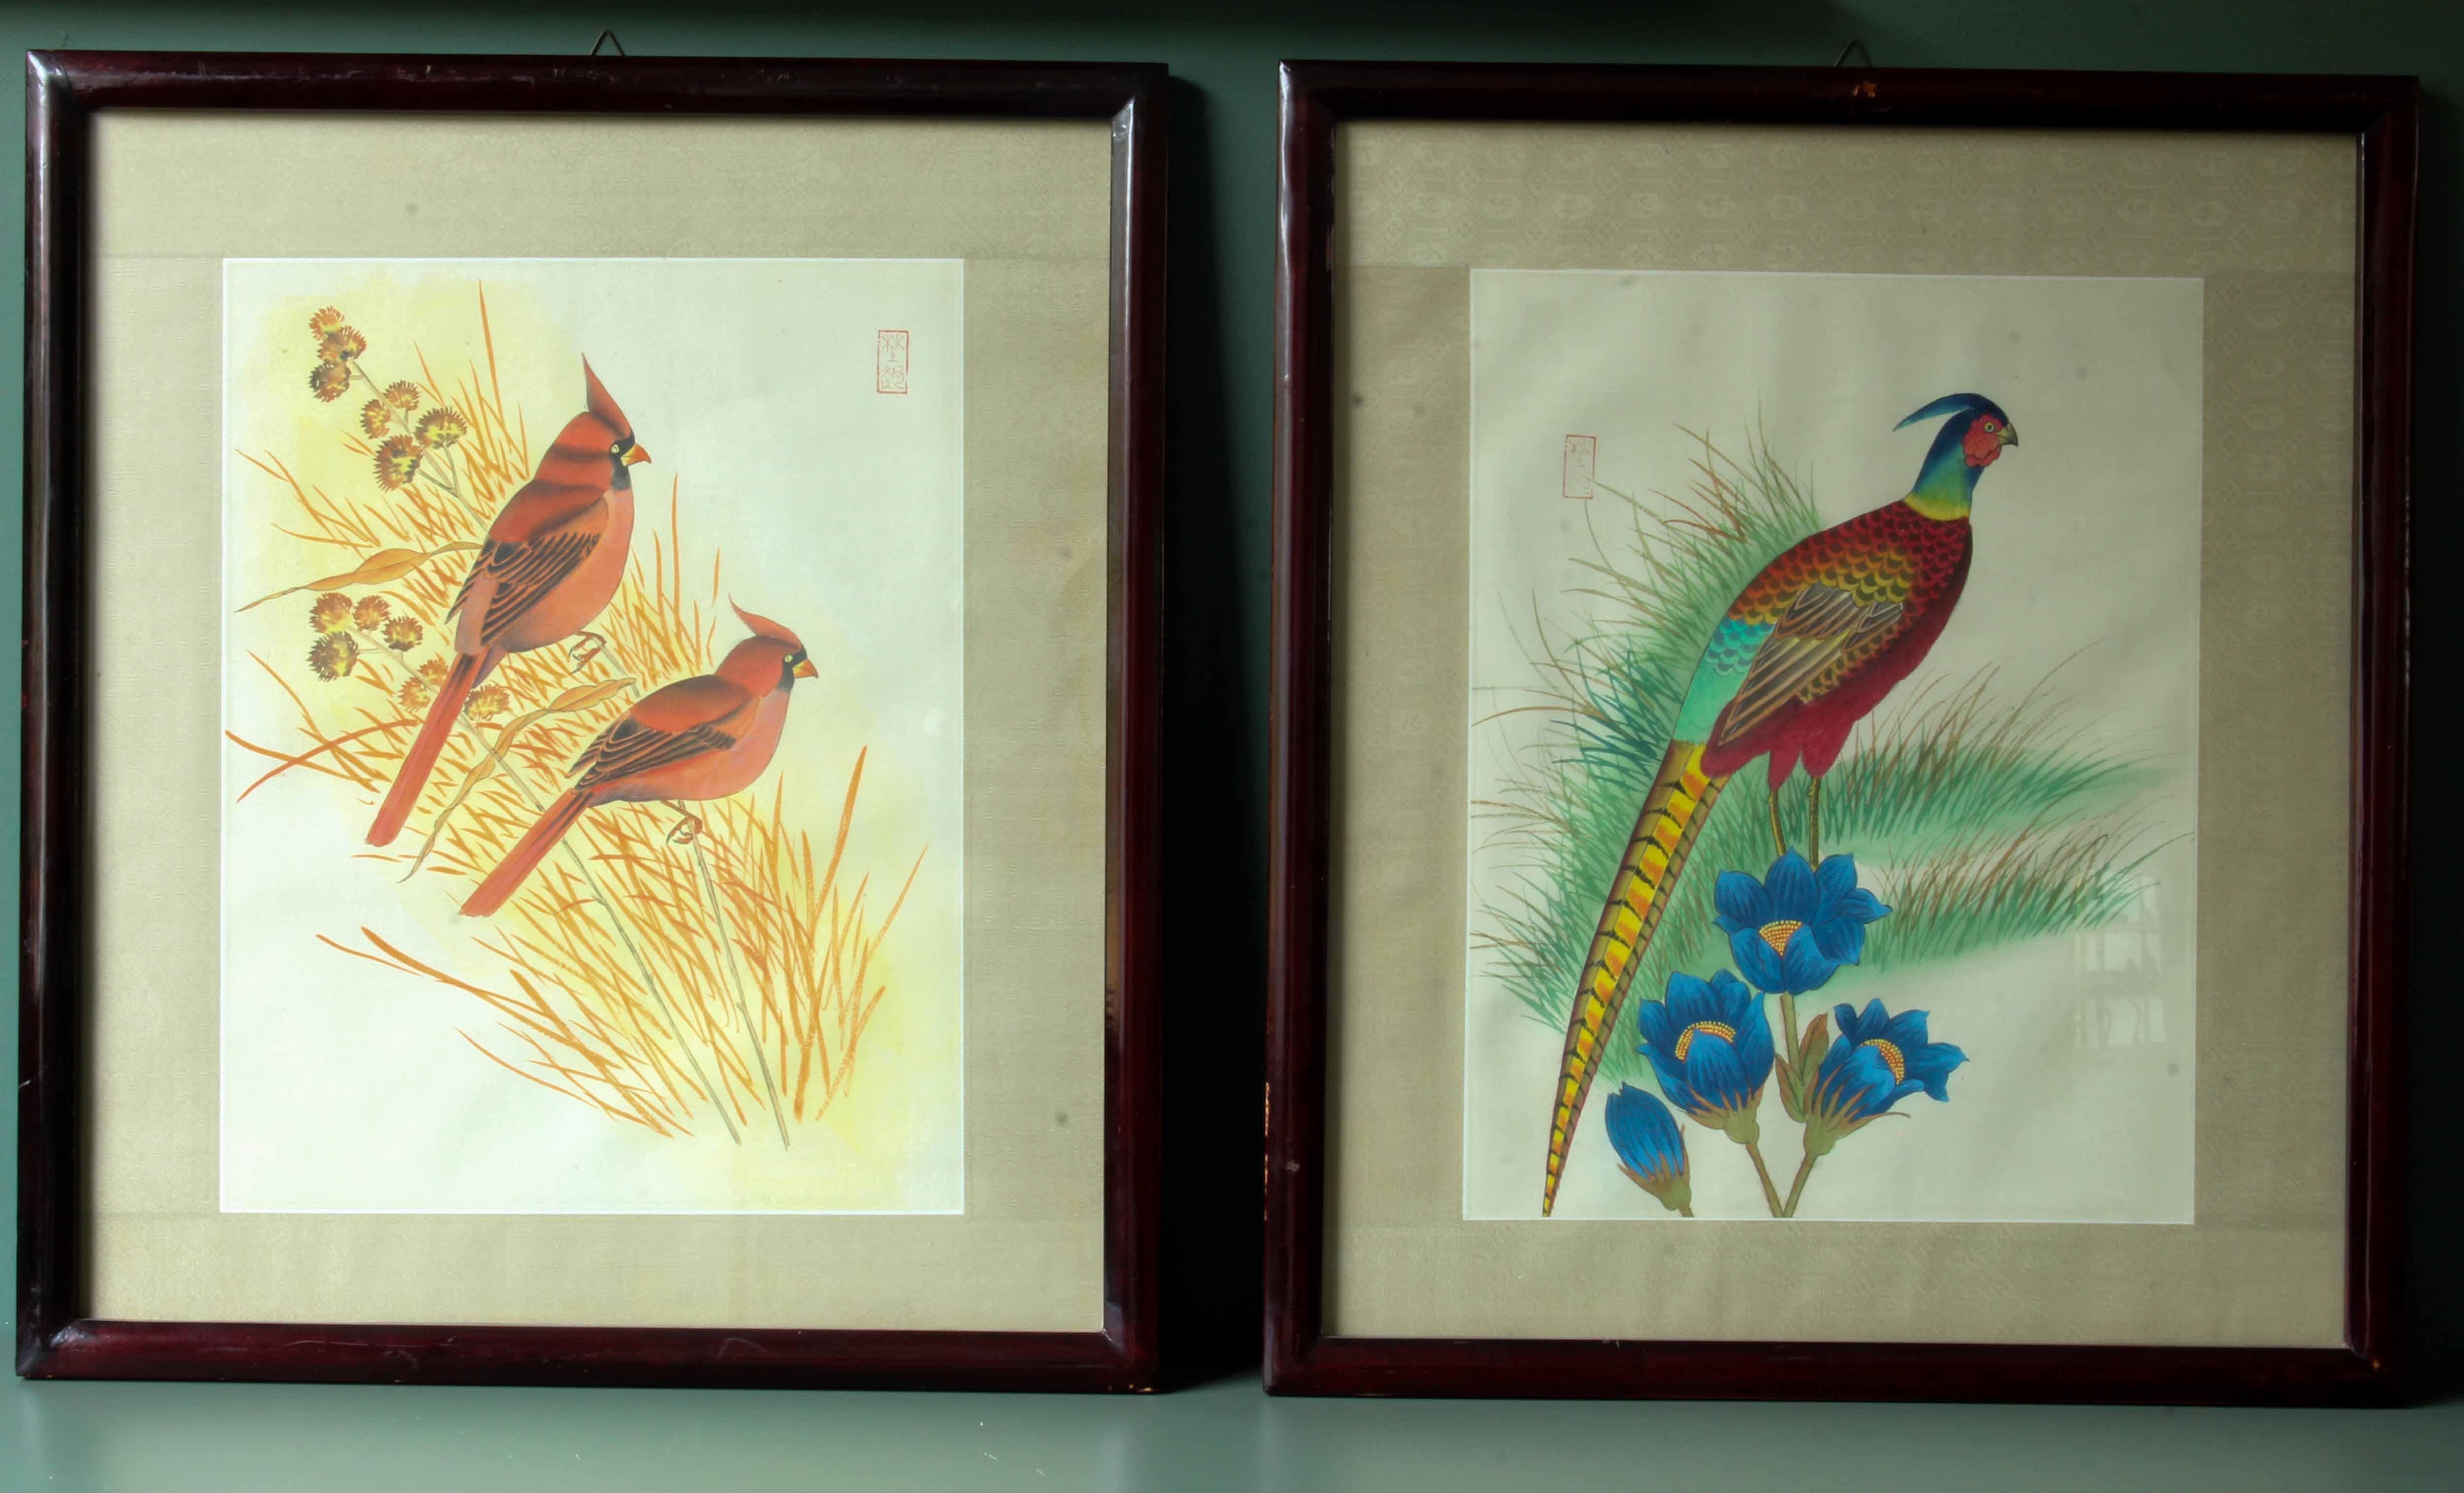 Antique chinese paintings on rice paper. This unique set of 2 beautiful bird paintings on rice paper are from a very chique estate in Ventimiglia (Italy), c 1910s. They are framed in identical wooden frames with beautiful wood back. 

Dimensions: